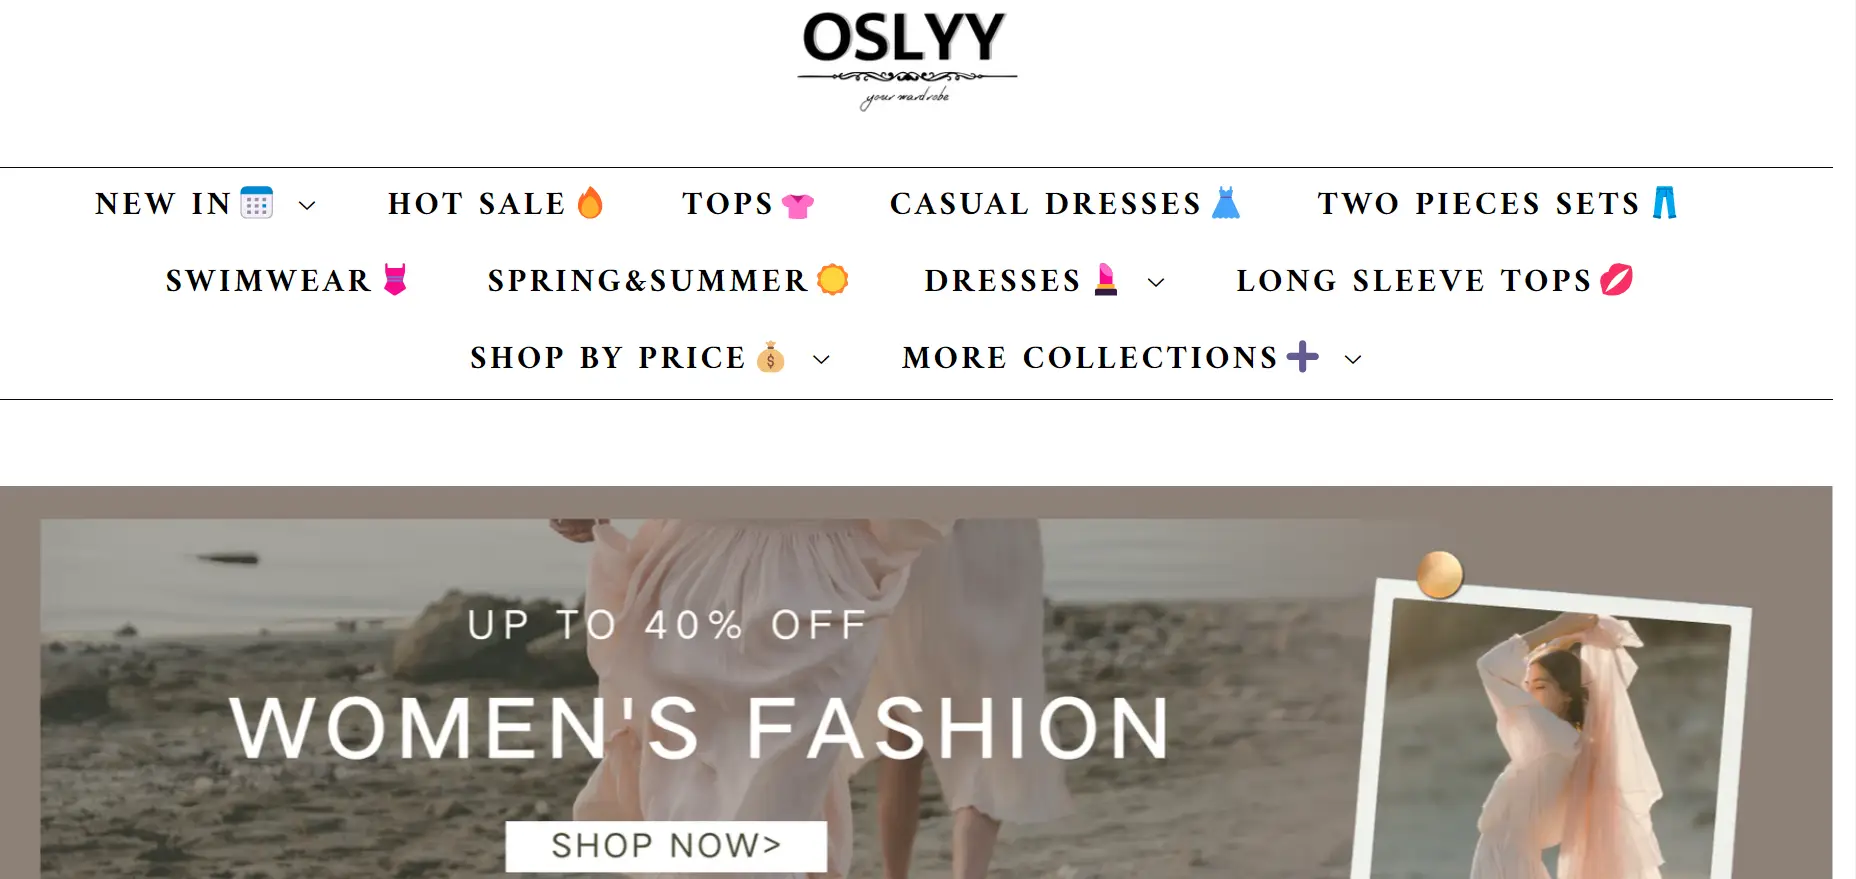 You are currently viewing Oslyy Reviews: Is Oslyy Clothing Legit or a Scam?